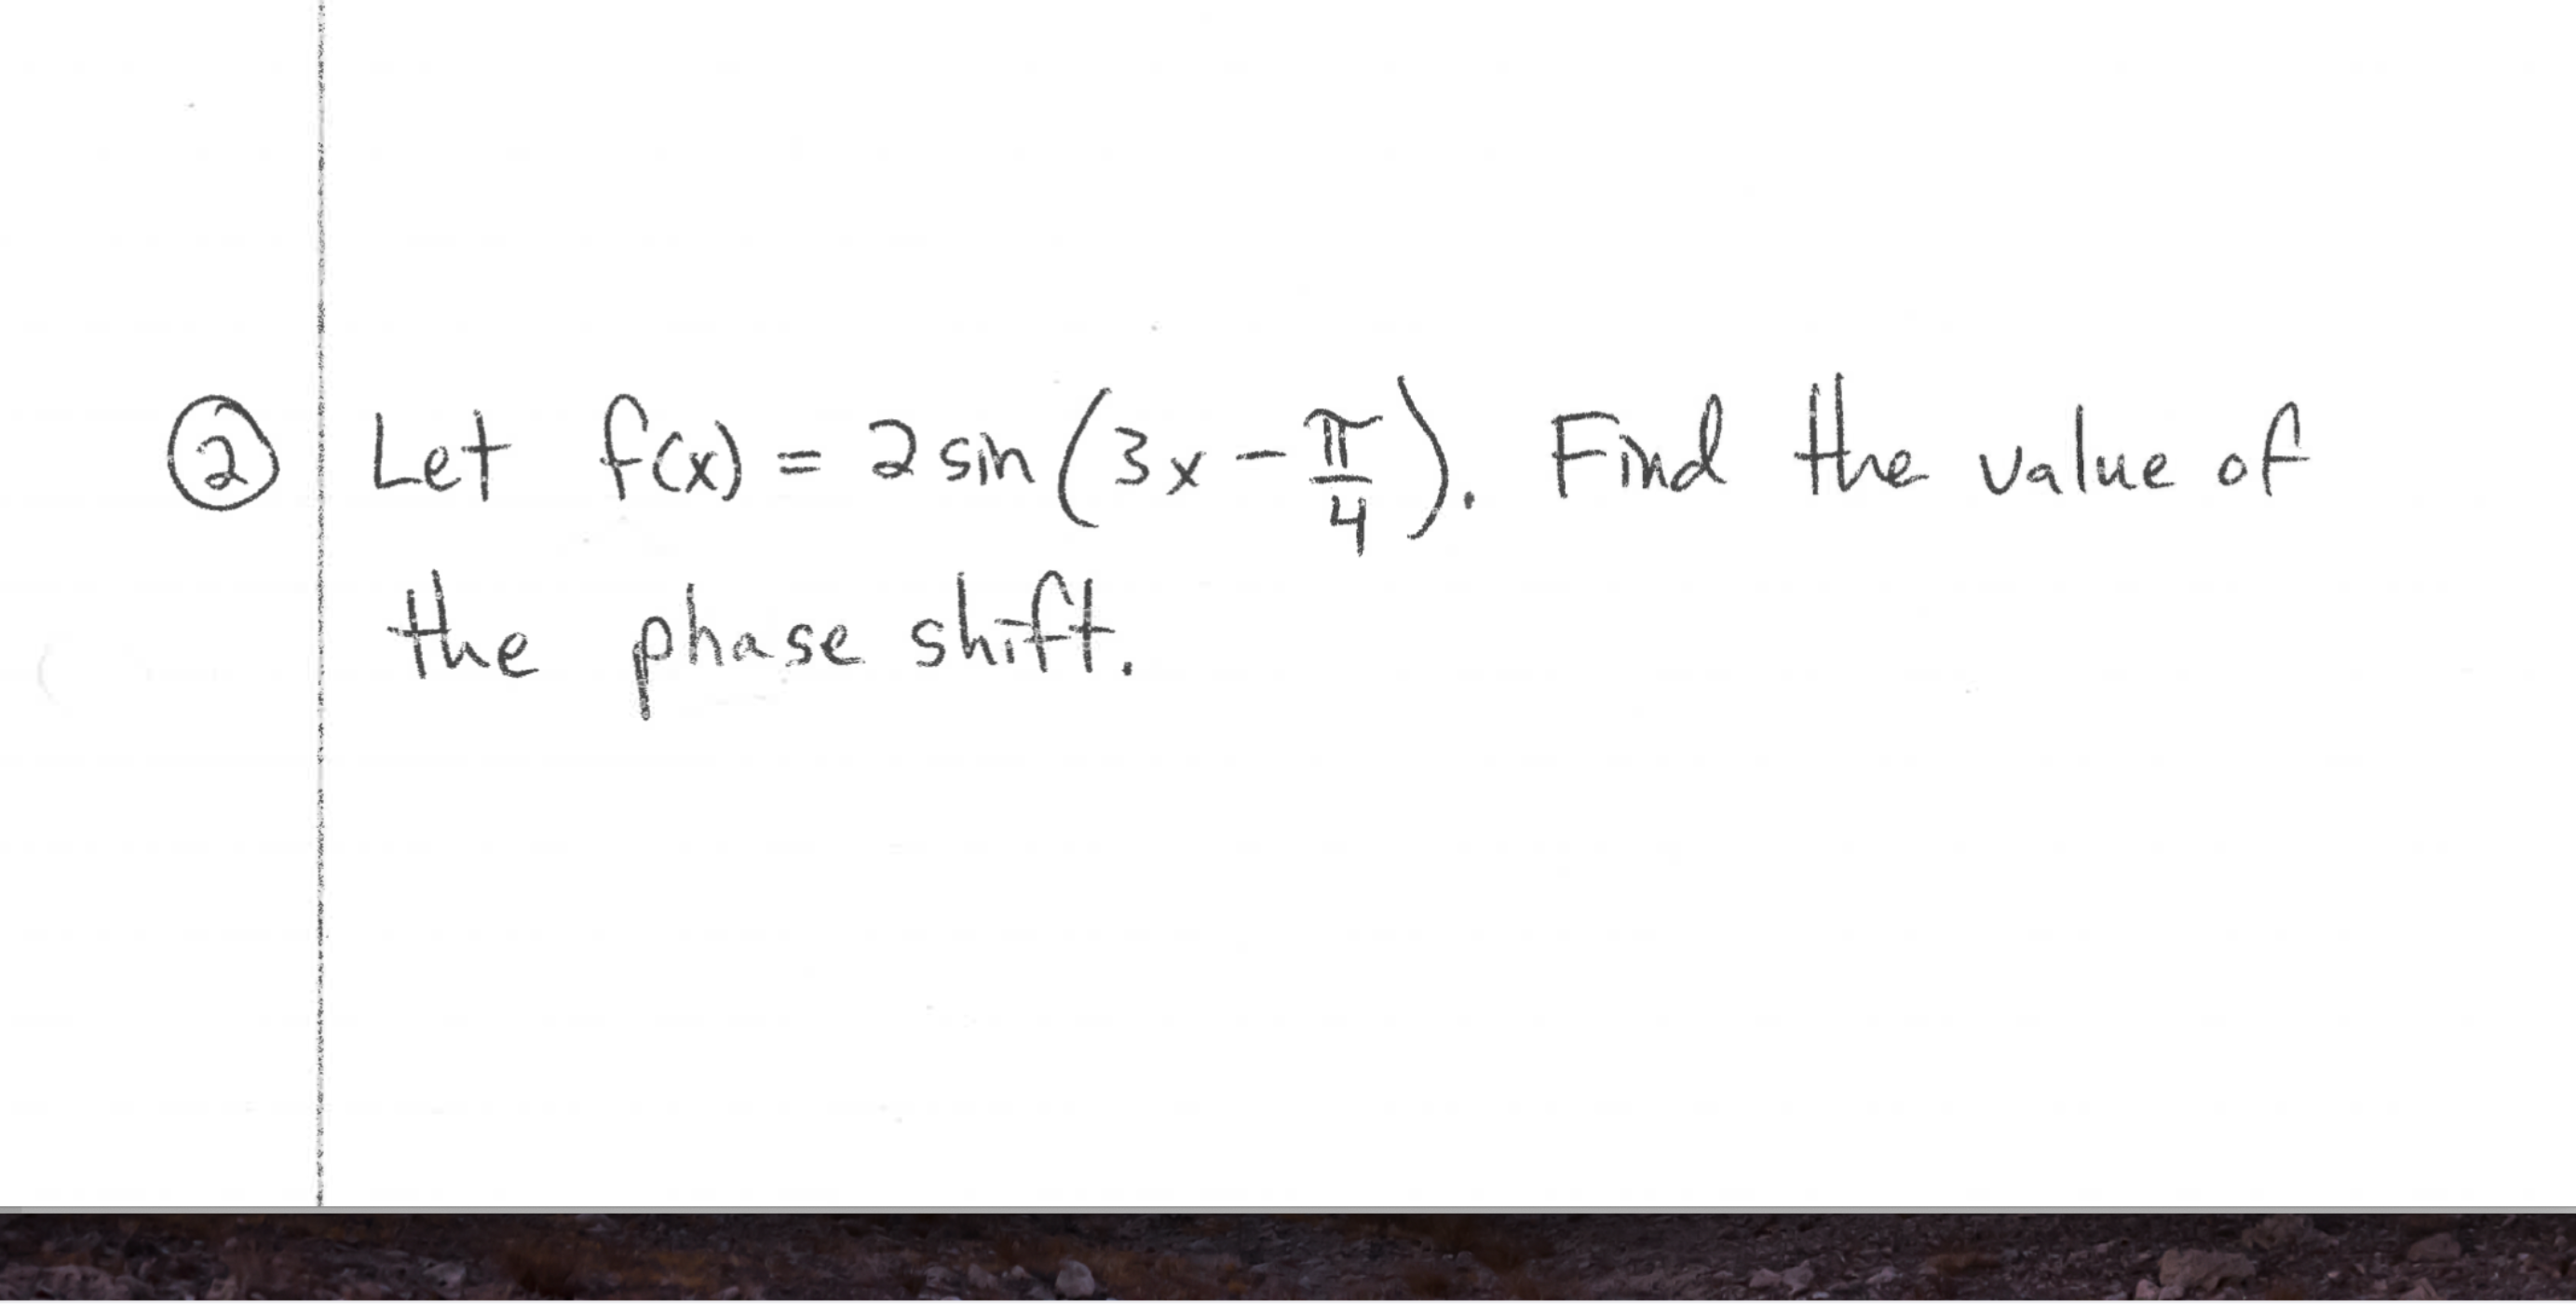 Let fae) = 2 sin (3x -). Find the value of
the phase shift.
2 sin
